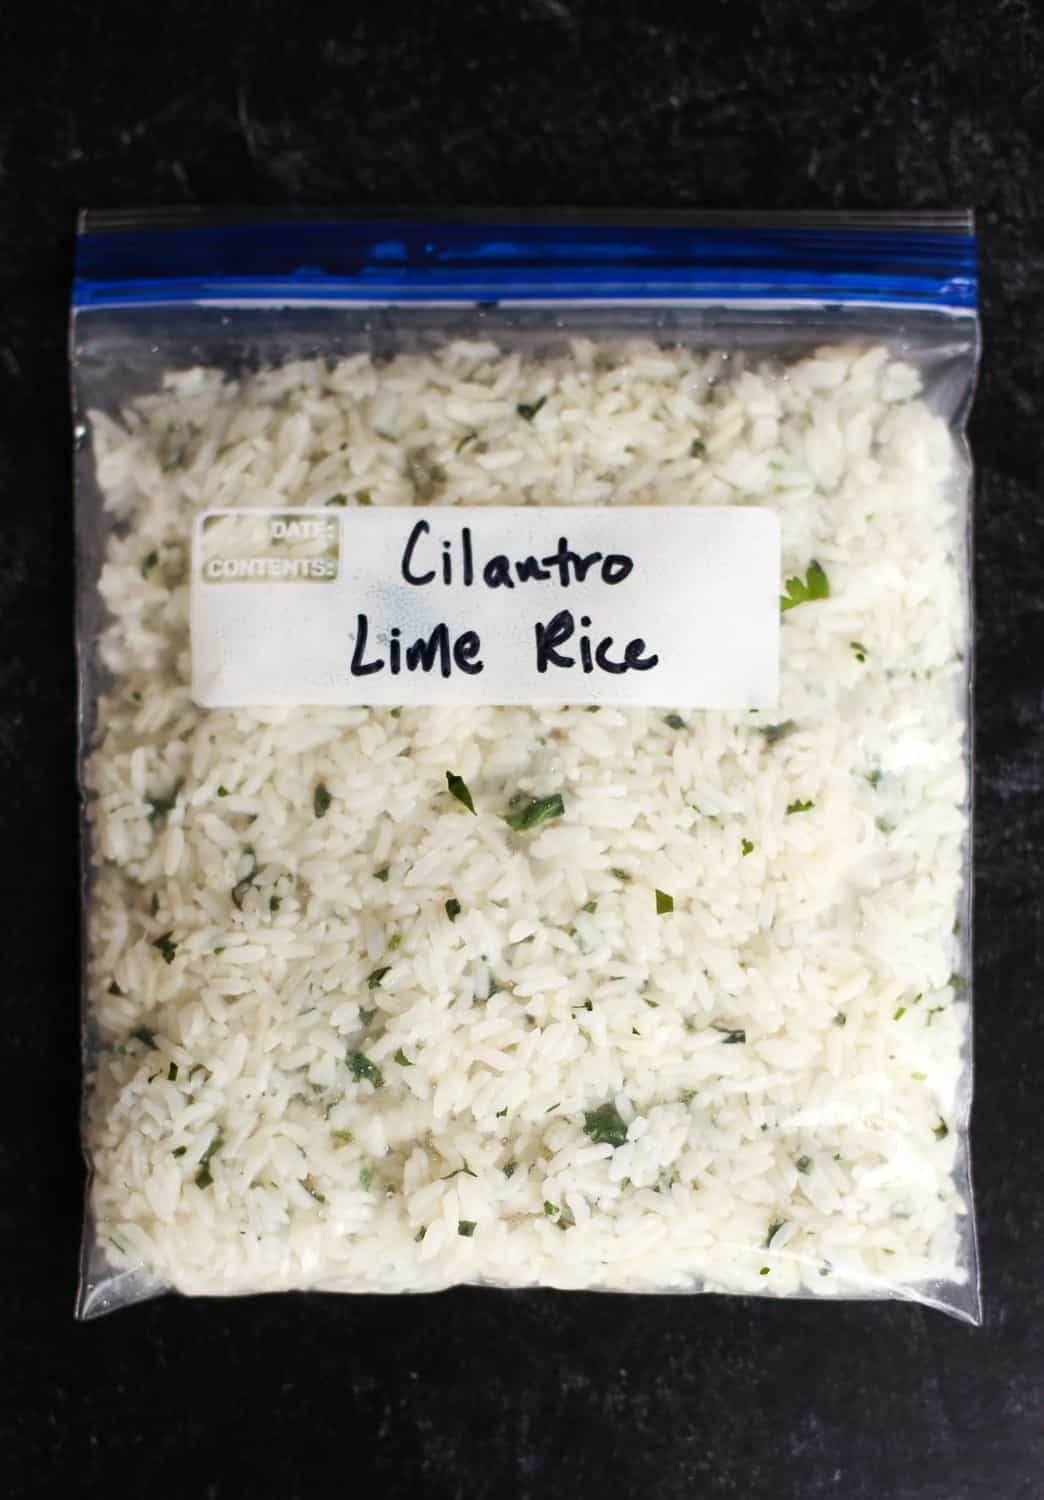 Cilantro Lime Rice in a freezer bag.